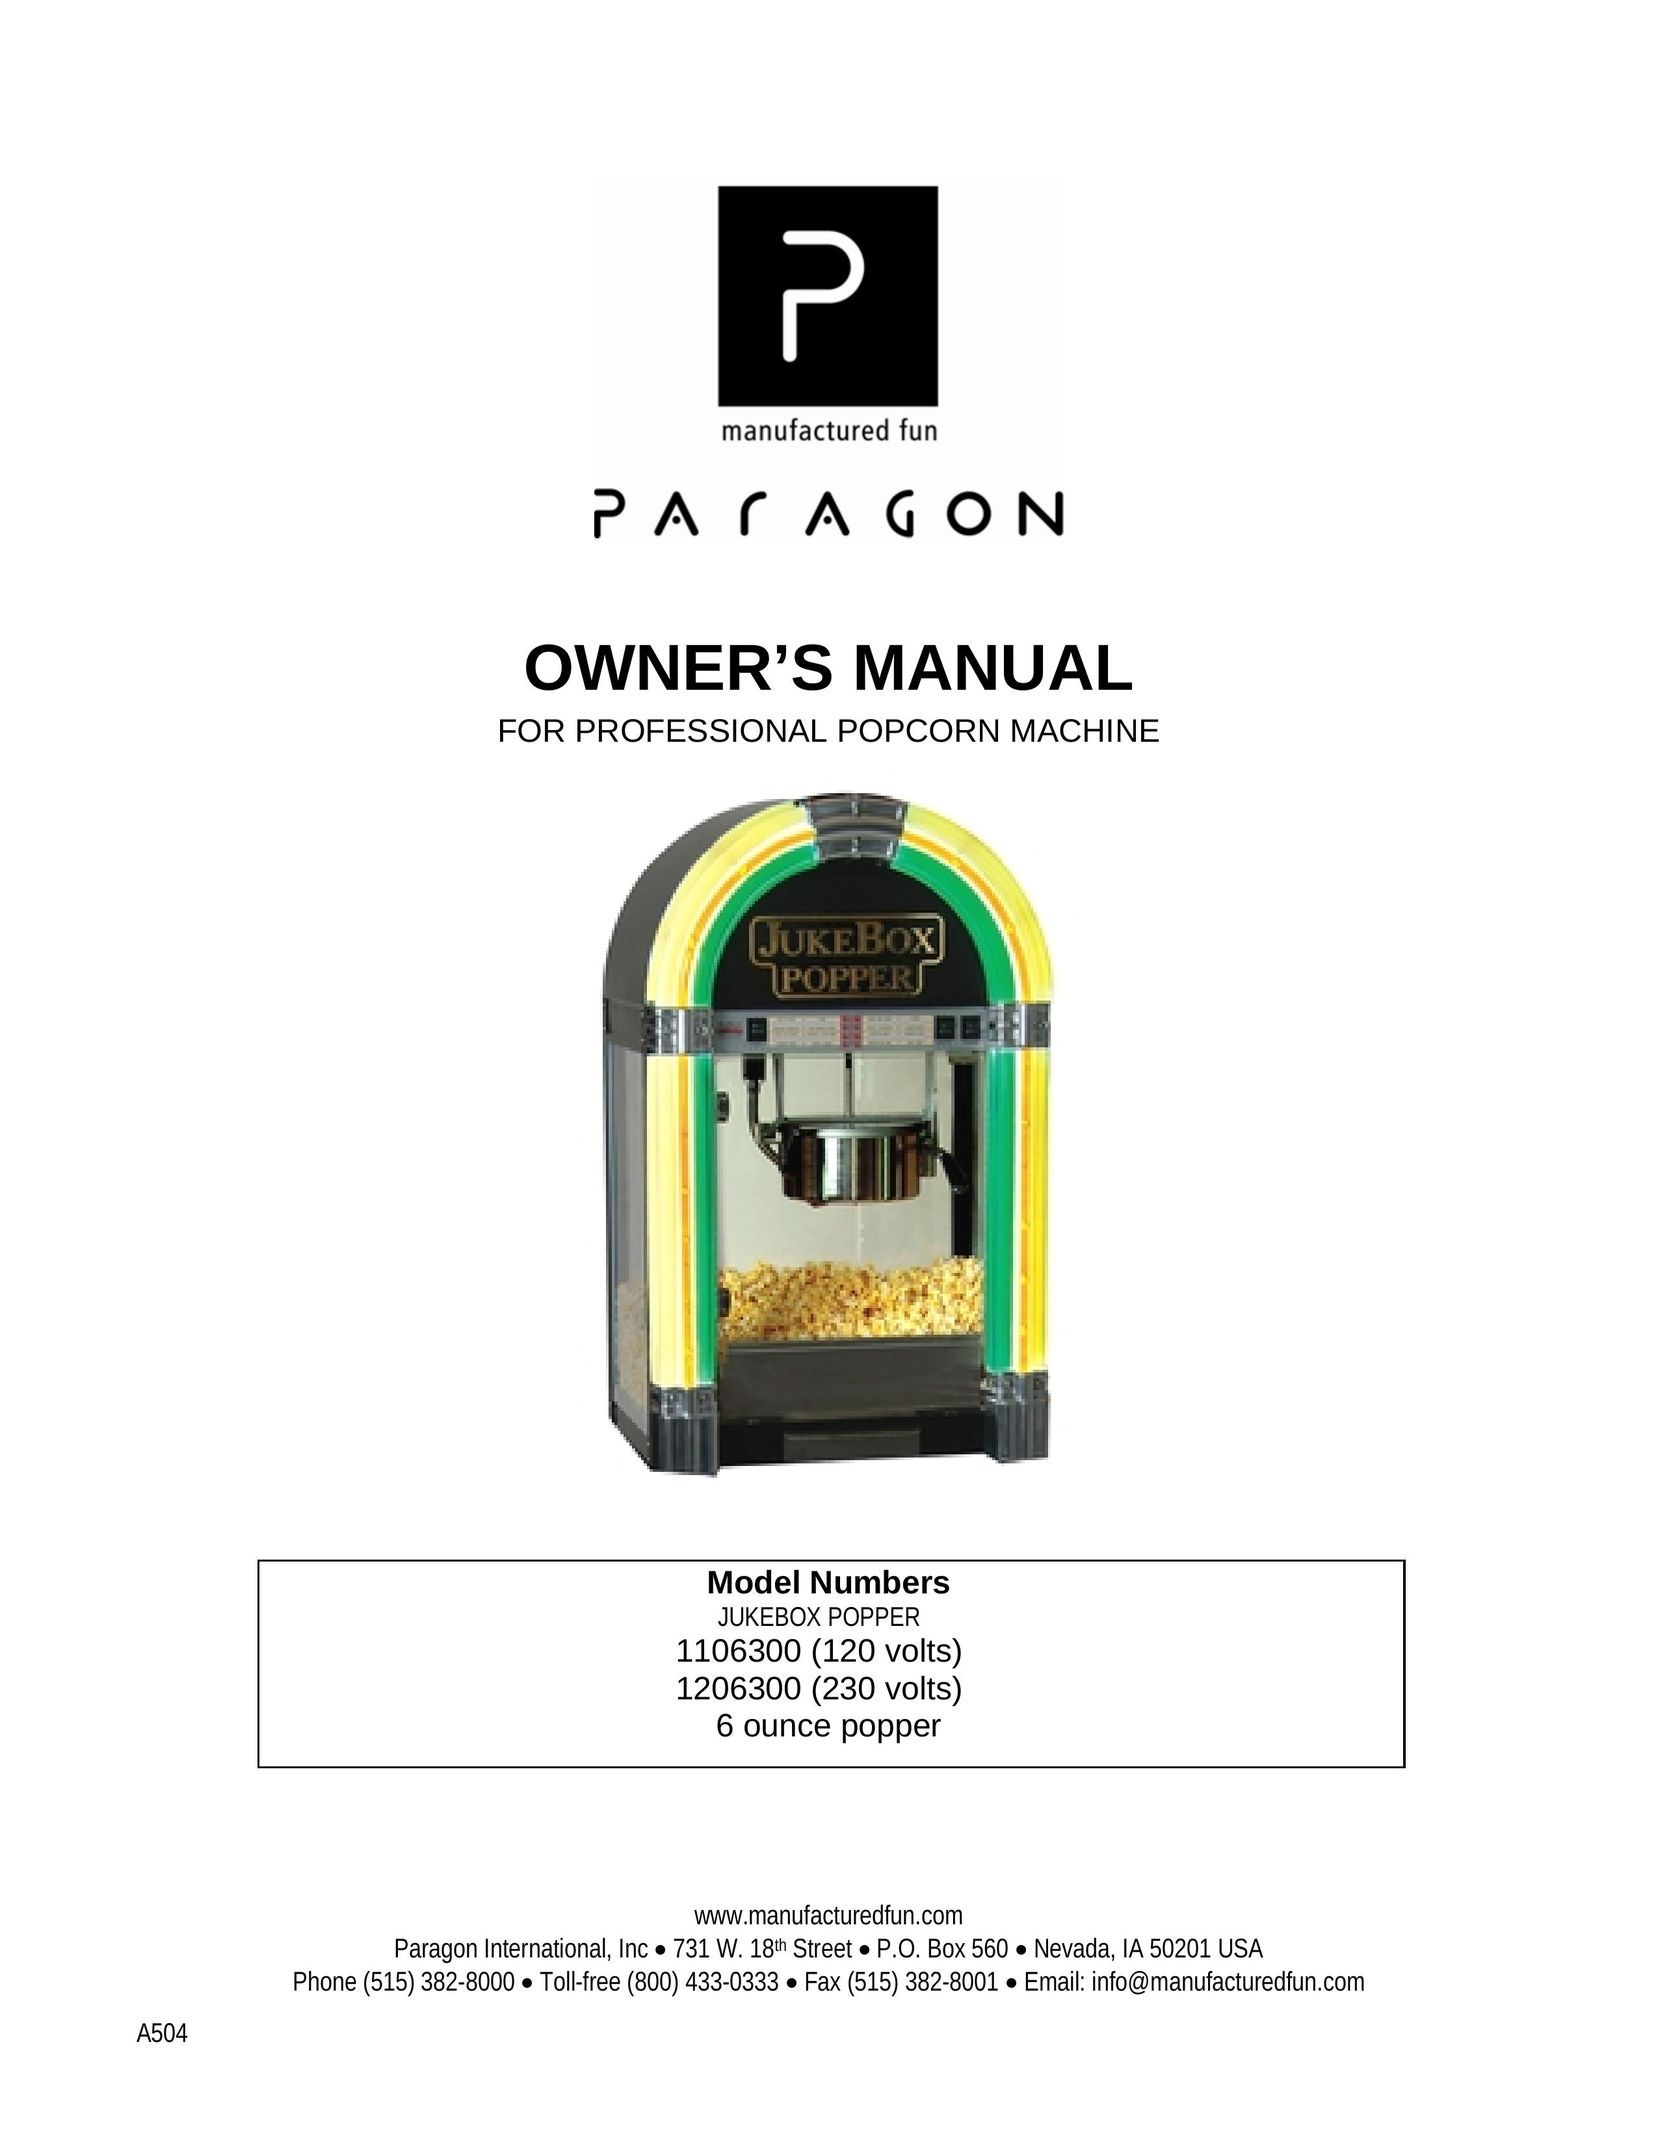 Paragon 1206300 Popcorn Poppers User Manual